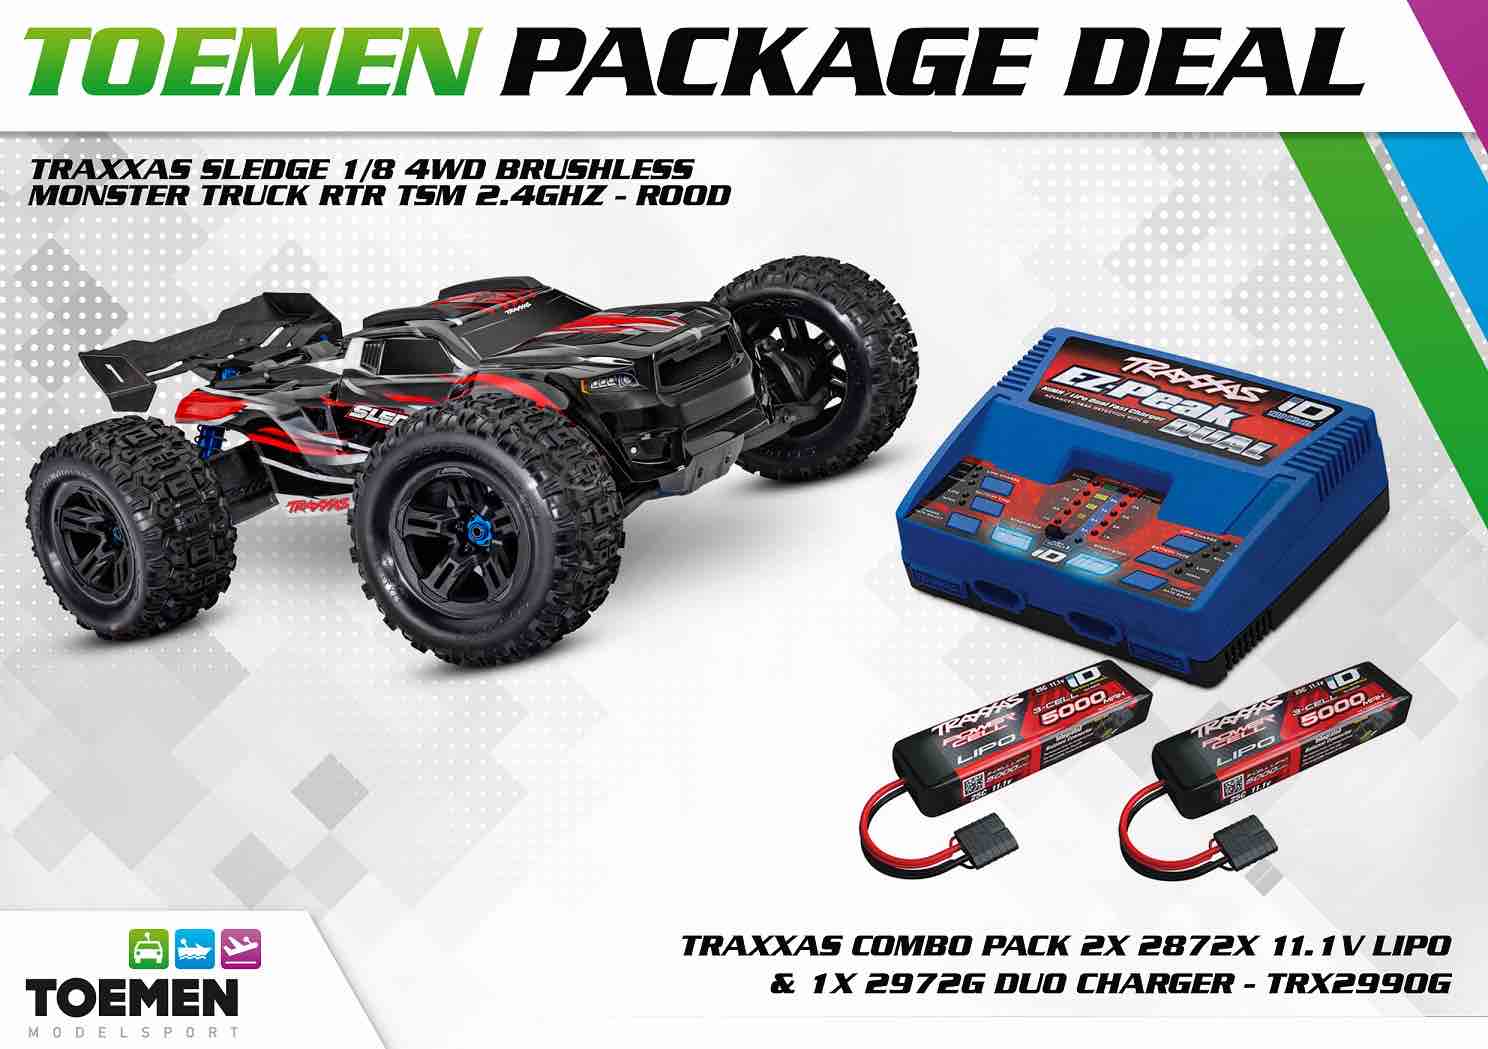 Traxxas Sledge 1/8 4WD Brushless Monster Truck RTR TSM 2.4Ghz Rood - inclusief Power Package